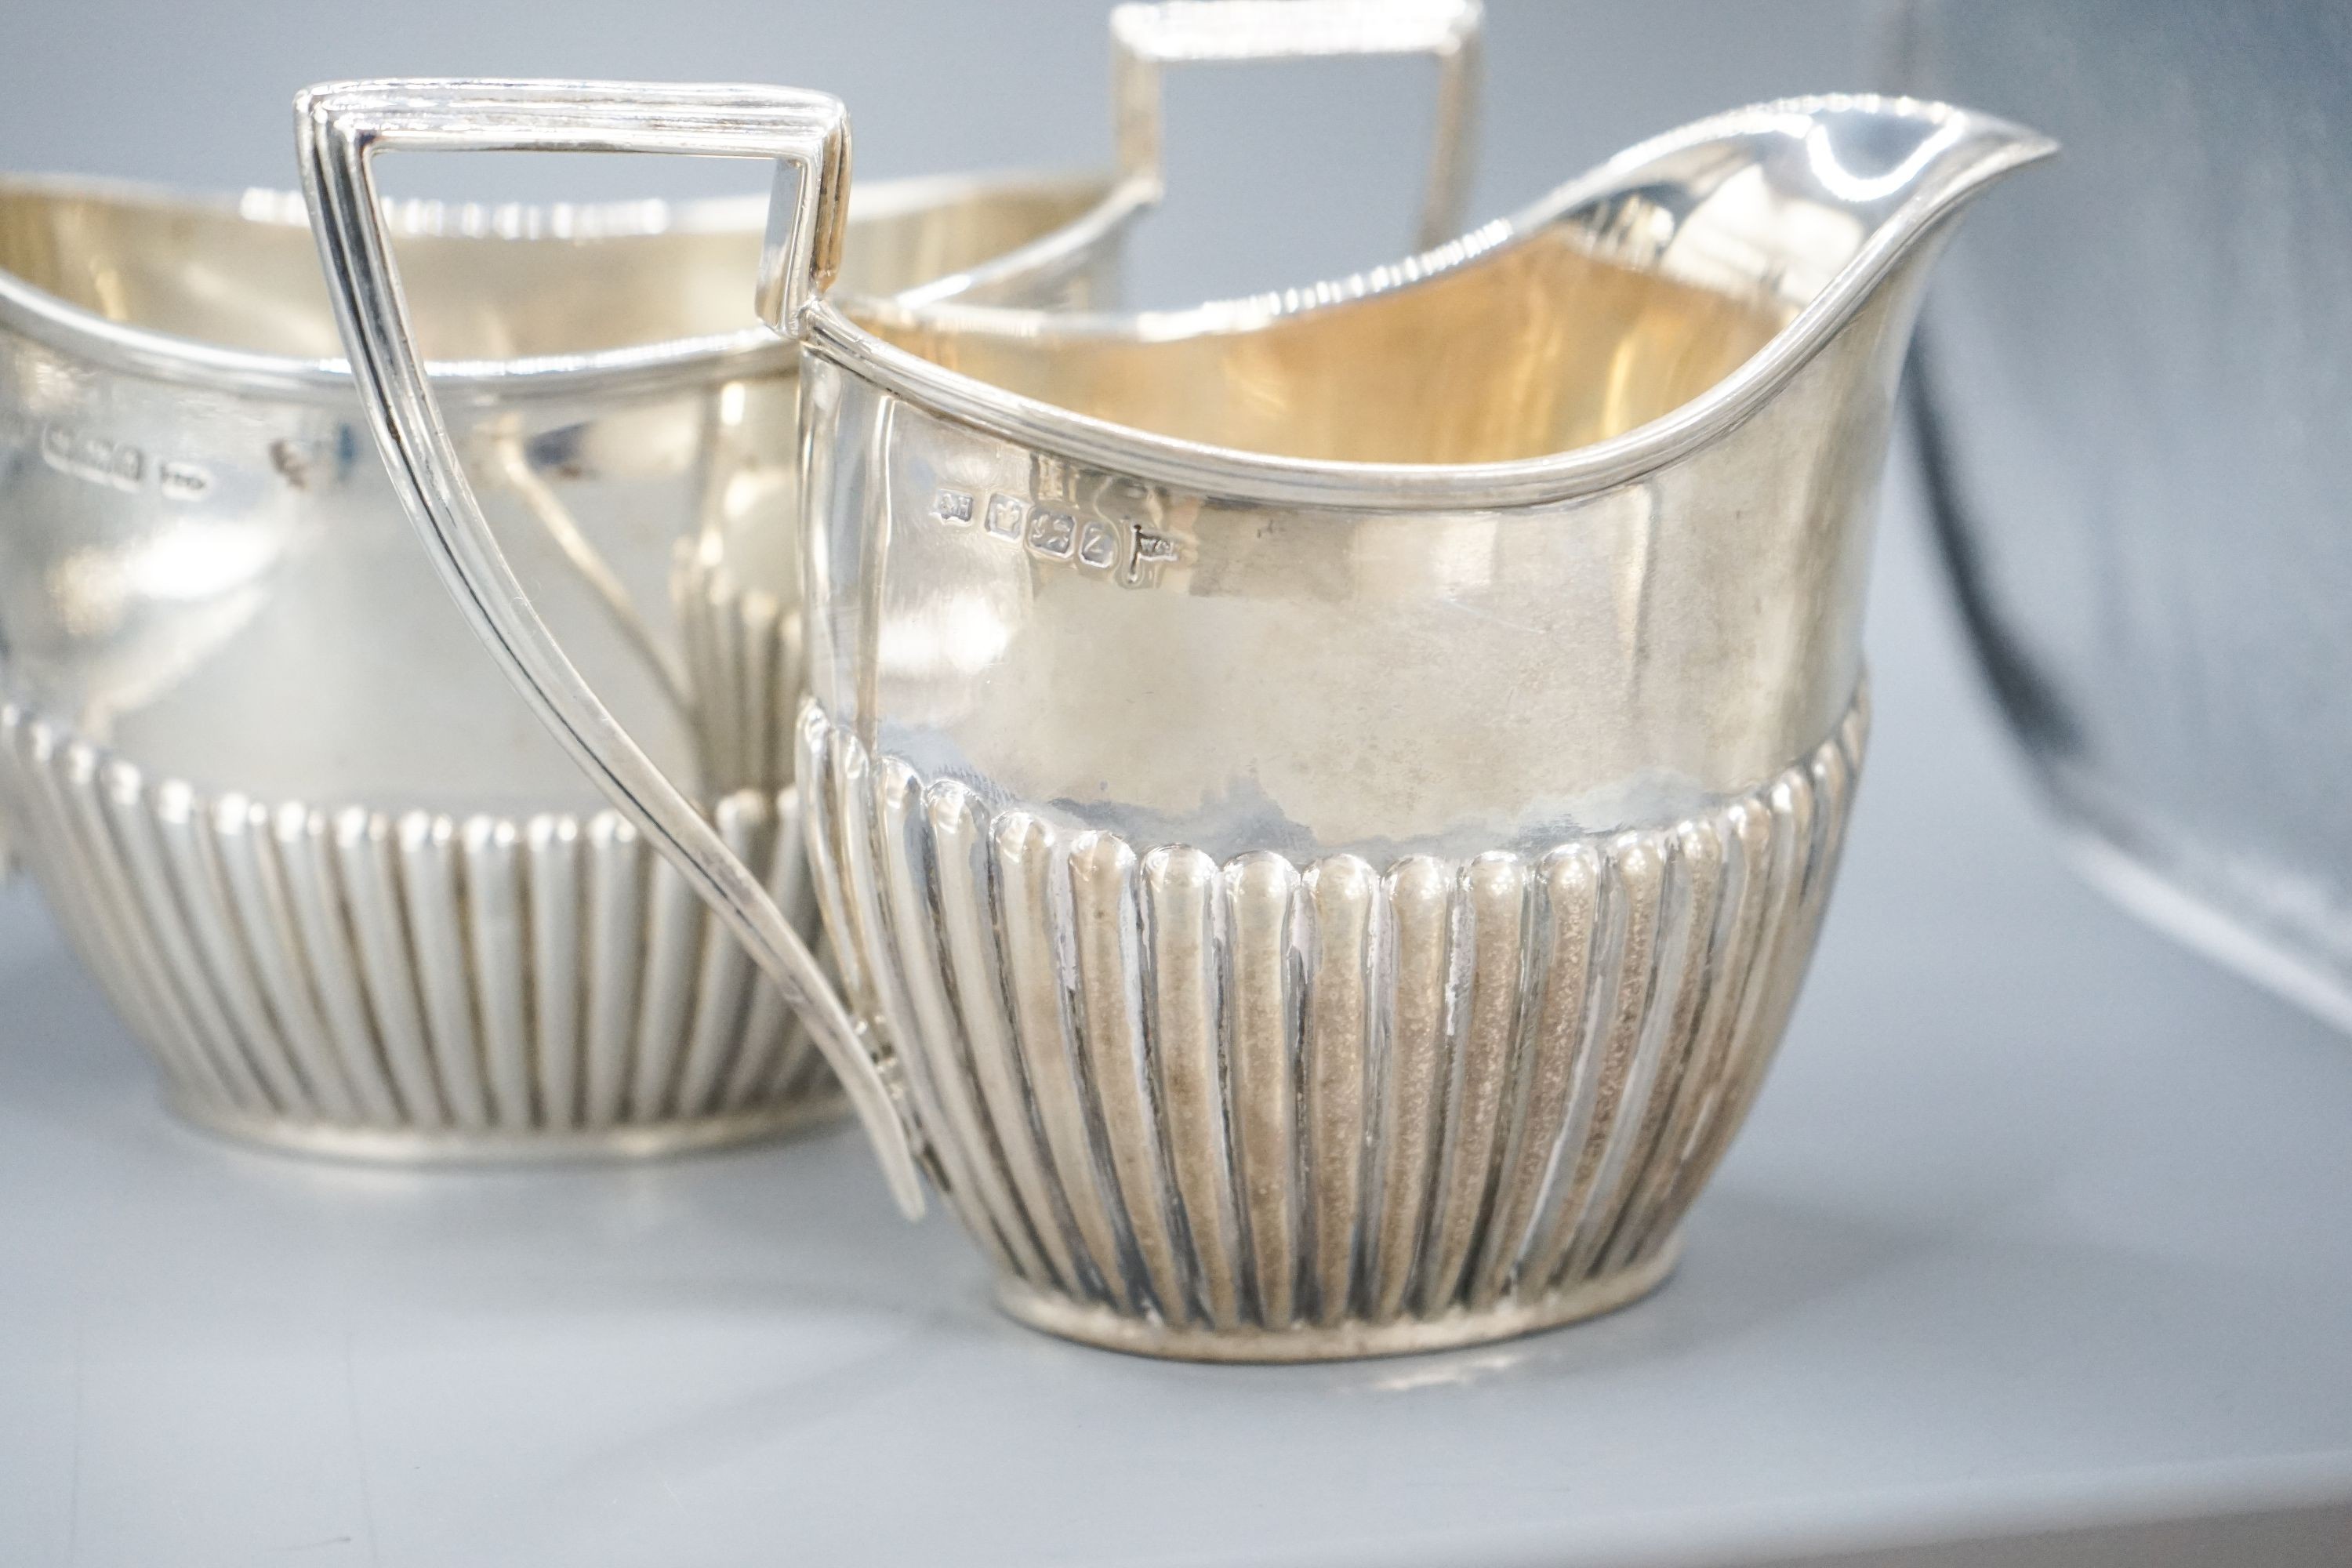 A late Victorian fluted silver cream jug and matching sugar bowl, by Walker & Hall, Sheffield, 1892/3, 13oz.